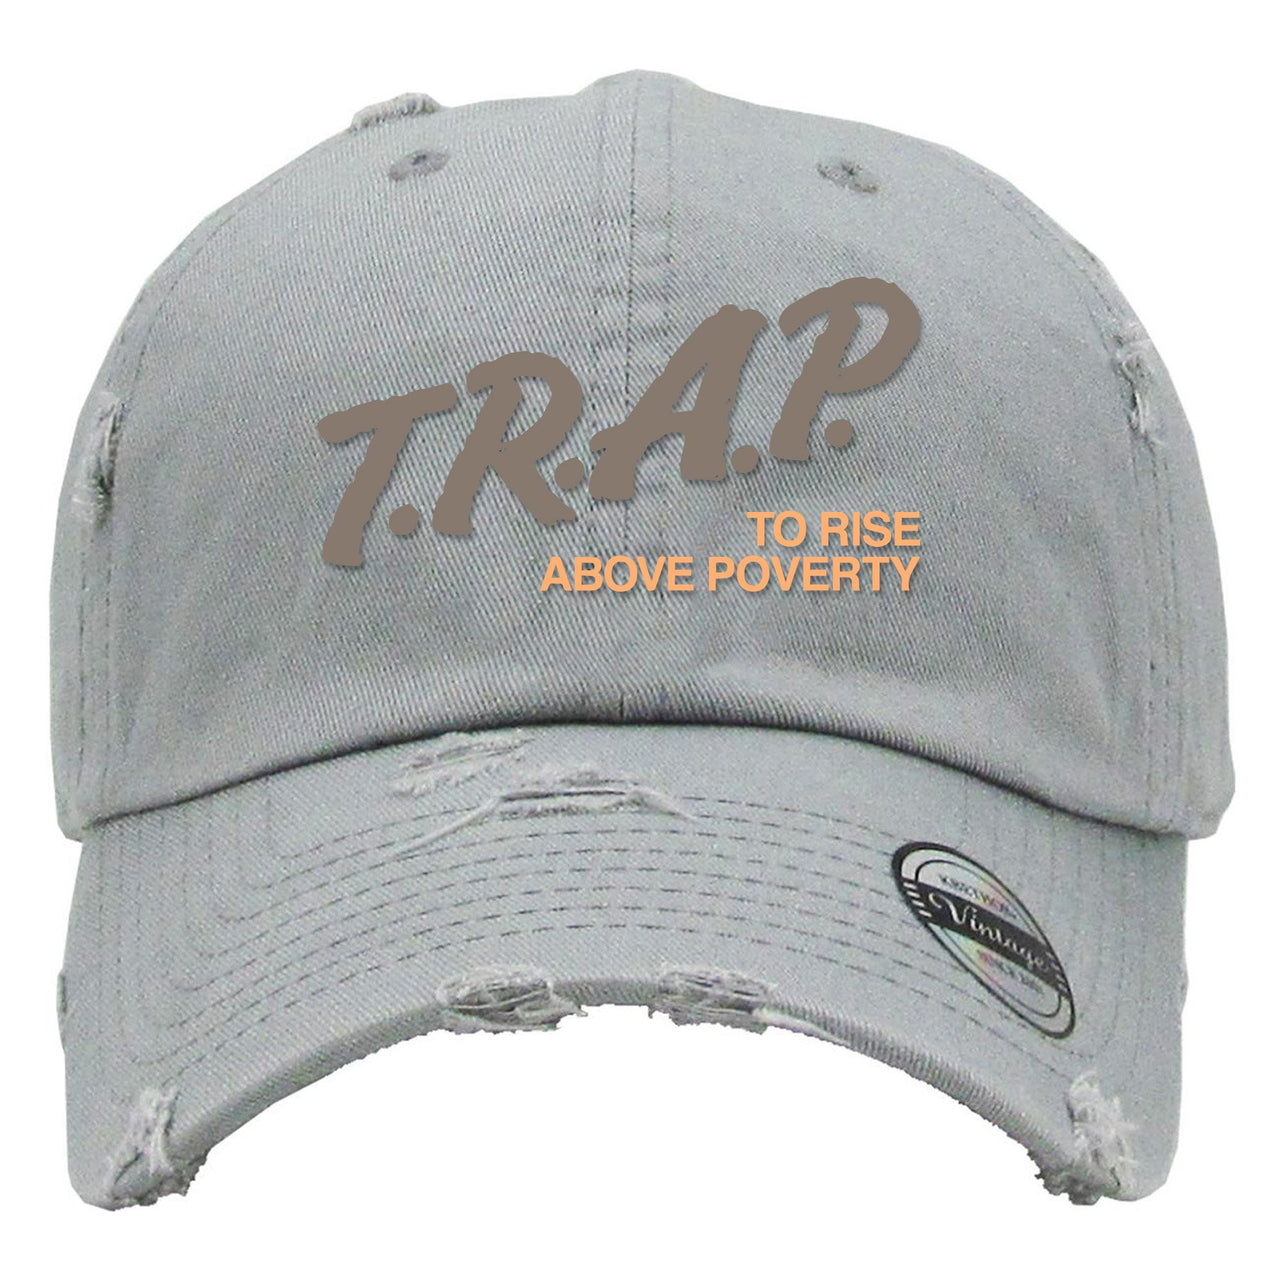 Geode 700s Distressed Dad Hat | Trap Rise Above Poverty, Light Gray